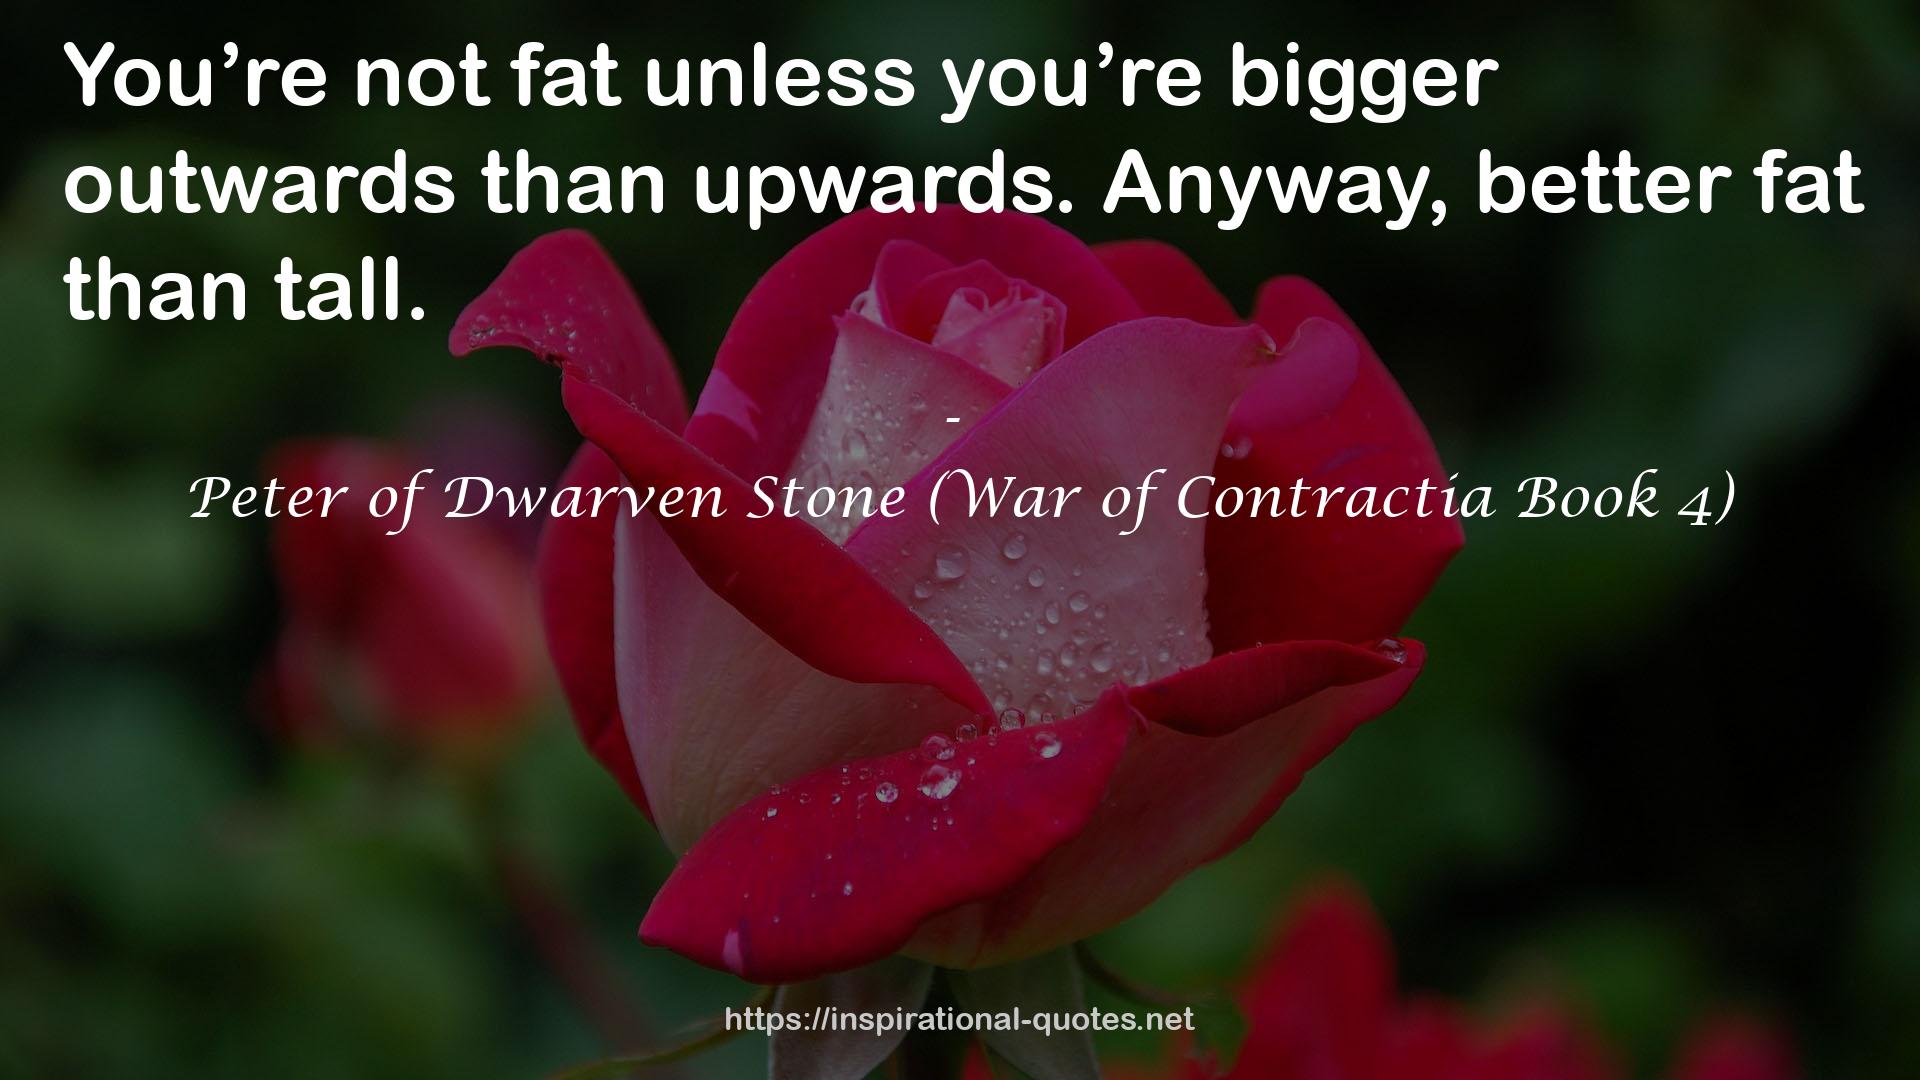 Peter of Dwarven Stone (War of Contractia Book 4) QUOTES